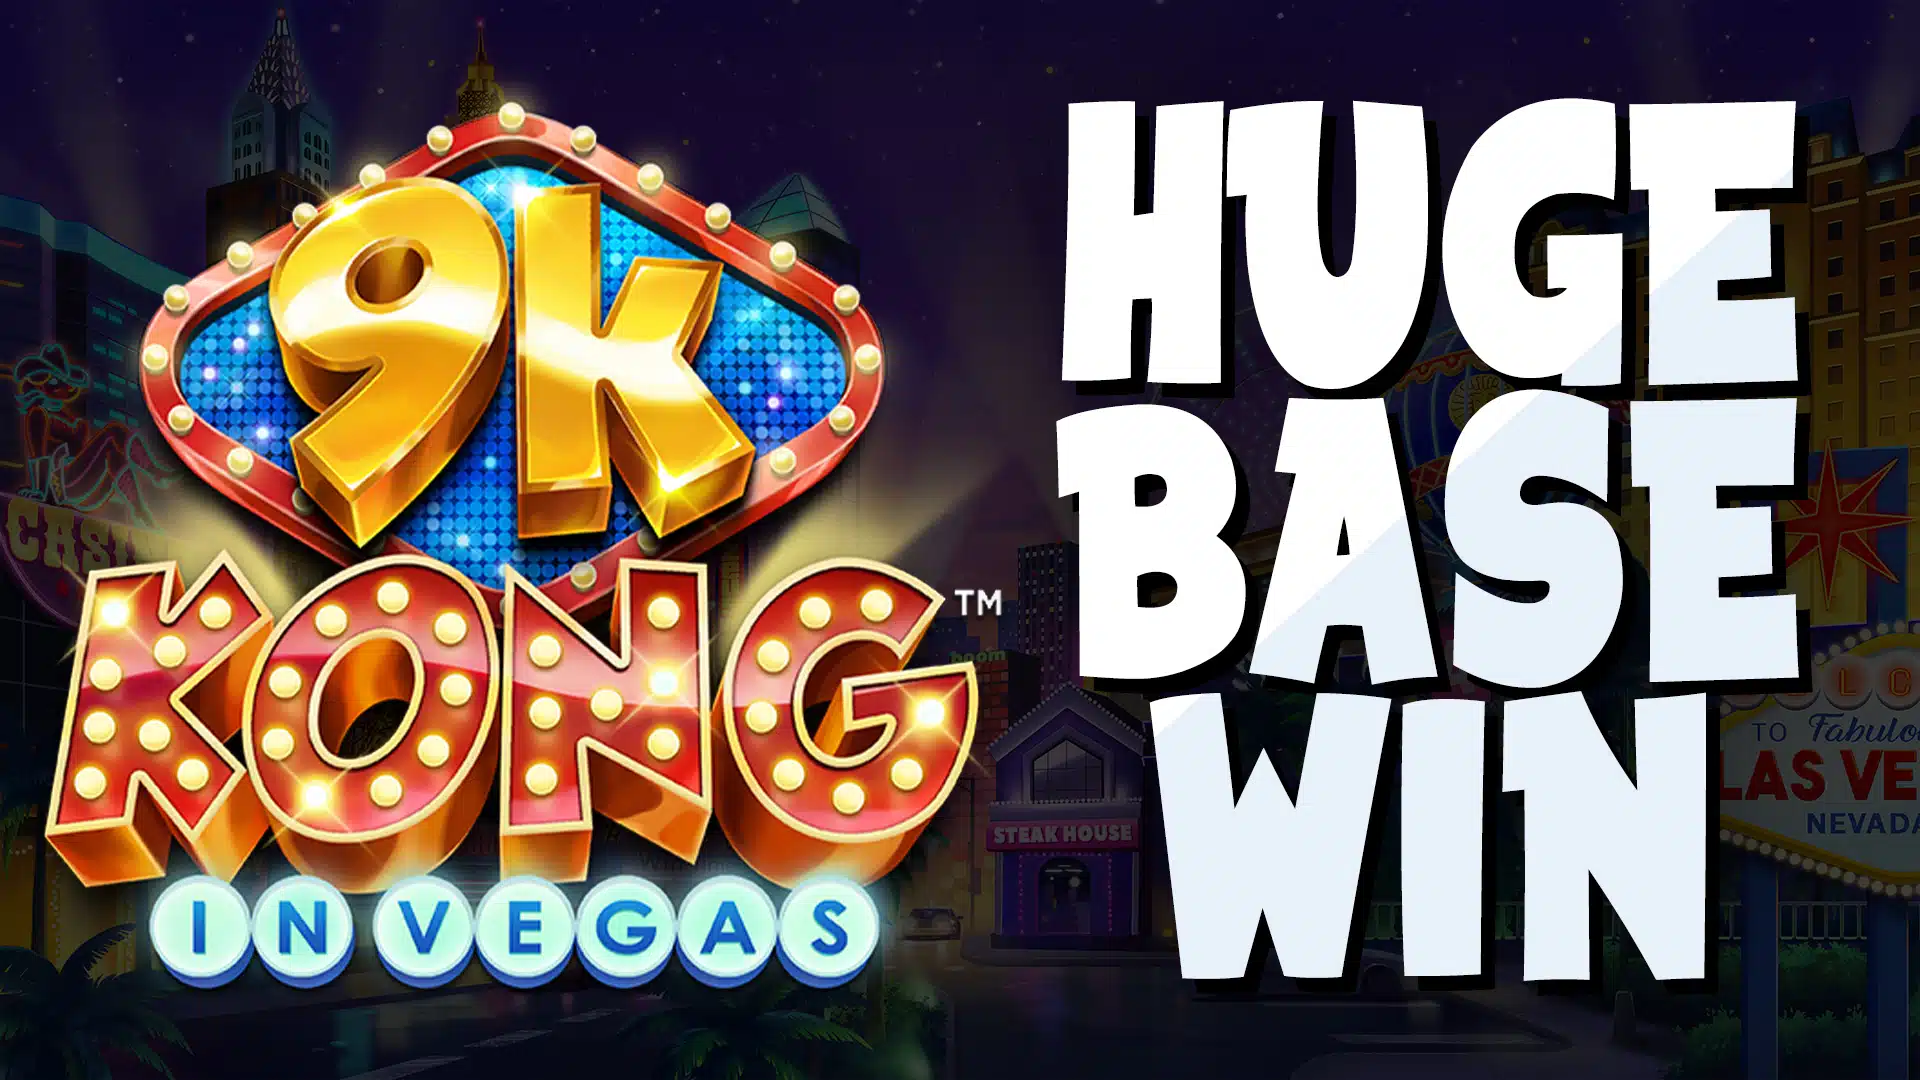 Watch this UK player win 5,184x bet in 9k Kong in Vegas, thanks to Big Win Repeater